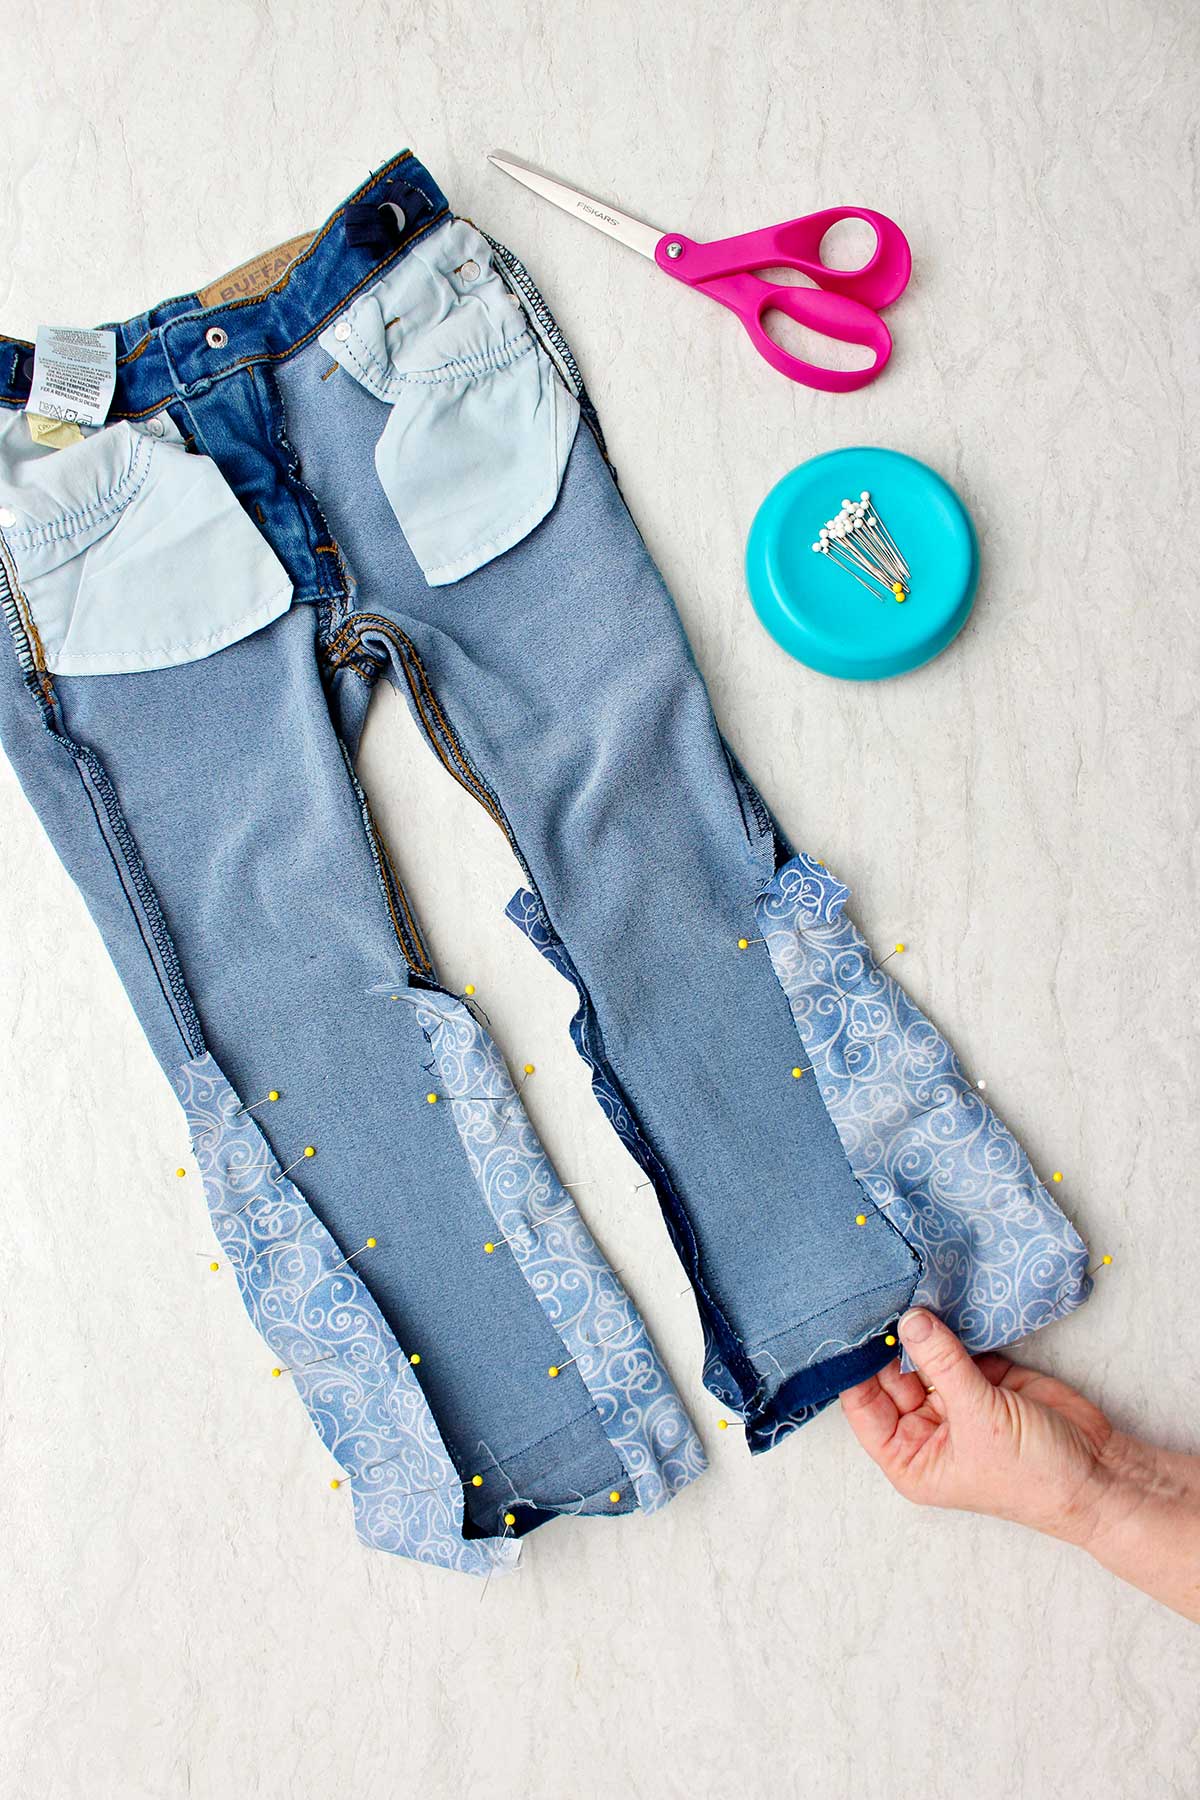 Inside out jeans with pins holding fabric in place to make bell bottoms with pins and scissors near by.